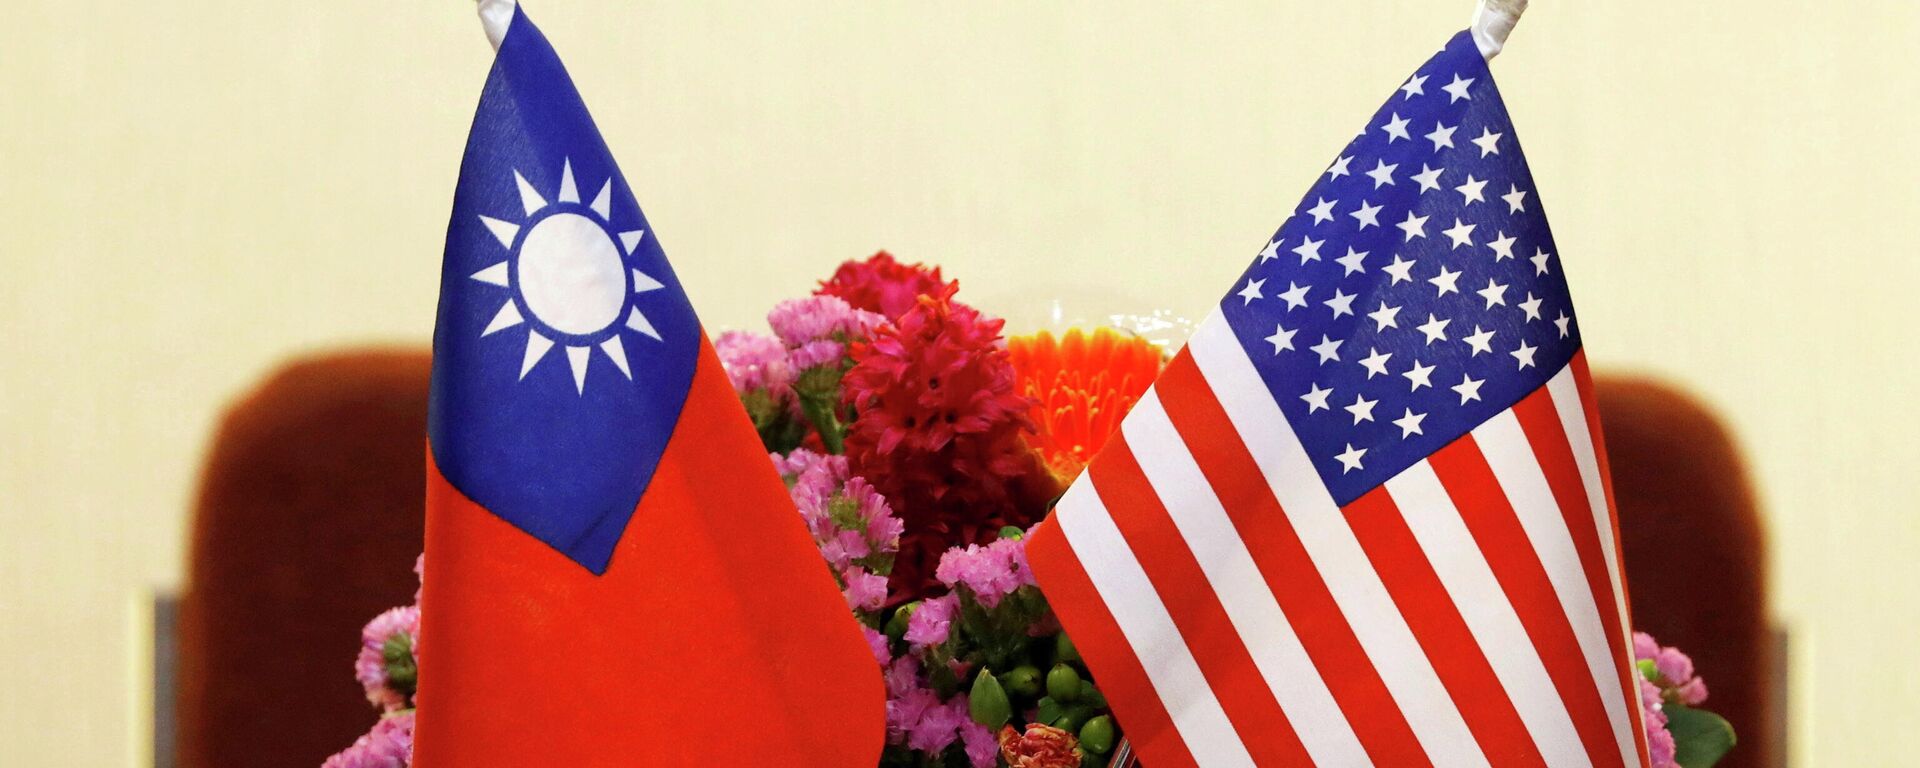 Flags of Taiwan and U.S. are placed for a meeting in Taipei, Taiwan March 27, 2018. - Sputnik International, 1920, 24.11.2021